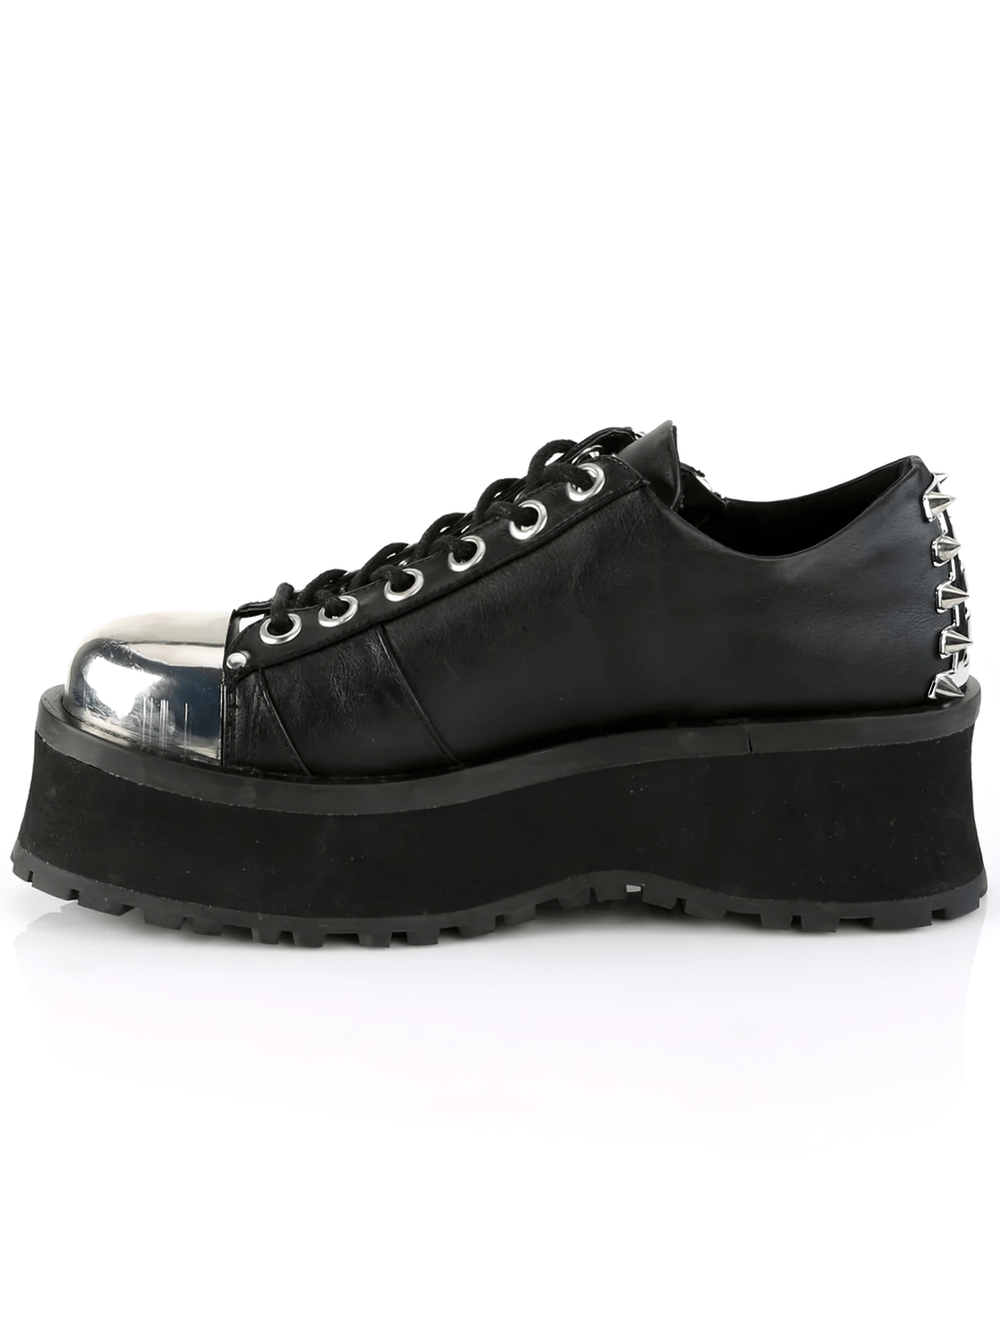 DEMONIA Studded Lace-Up Platform Sneakers with Metal Toe Cap